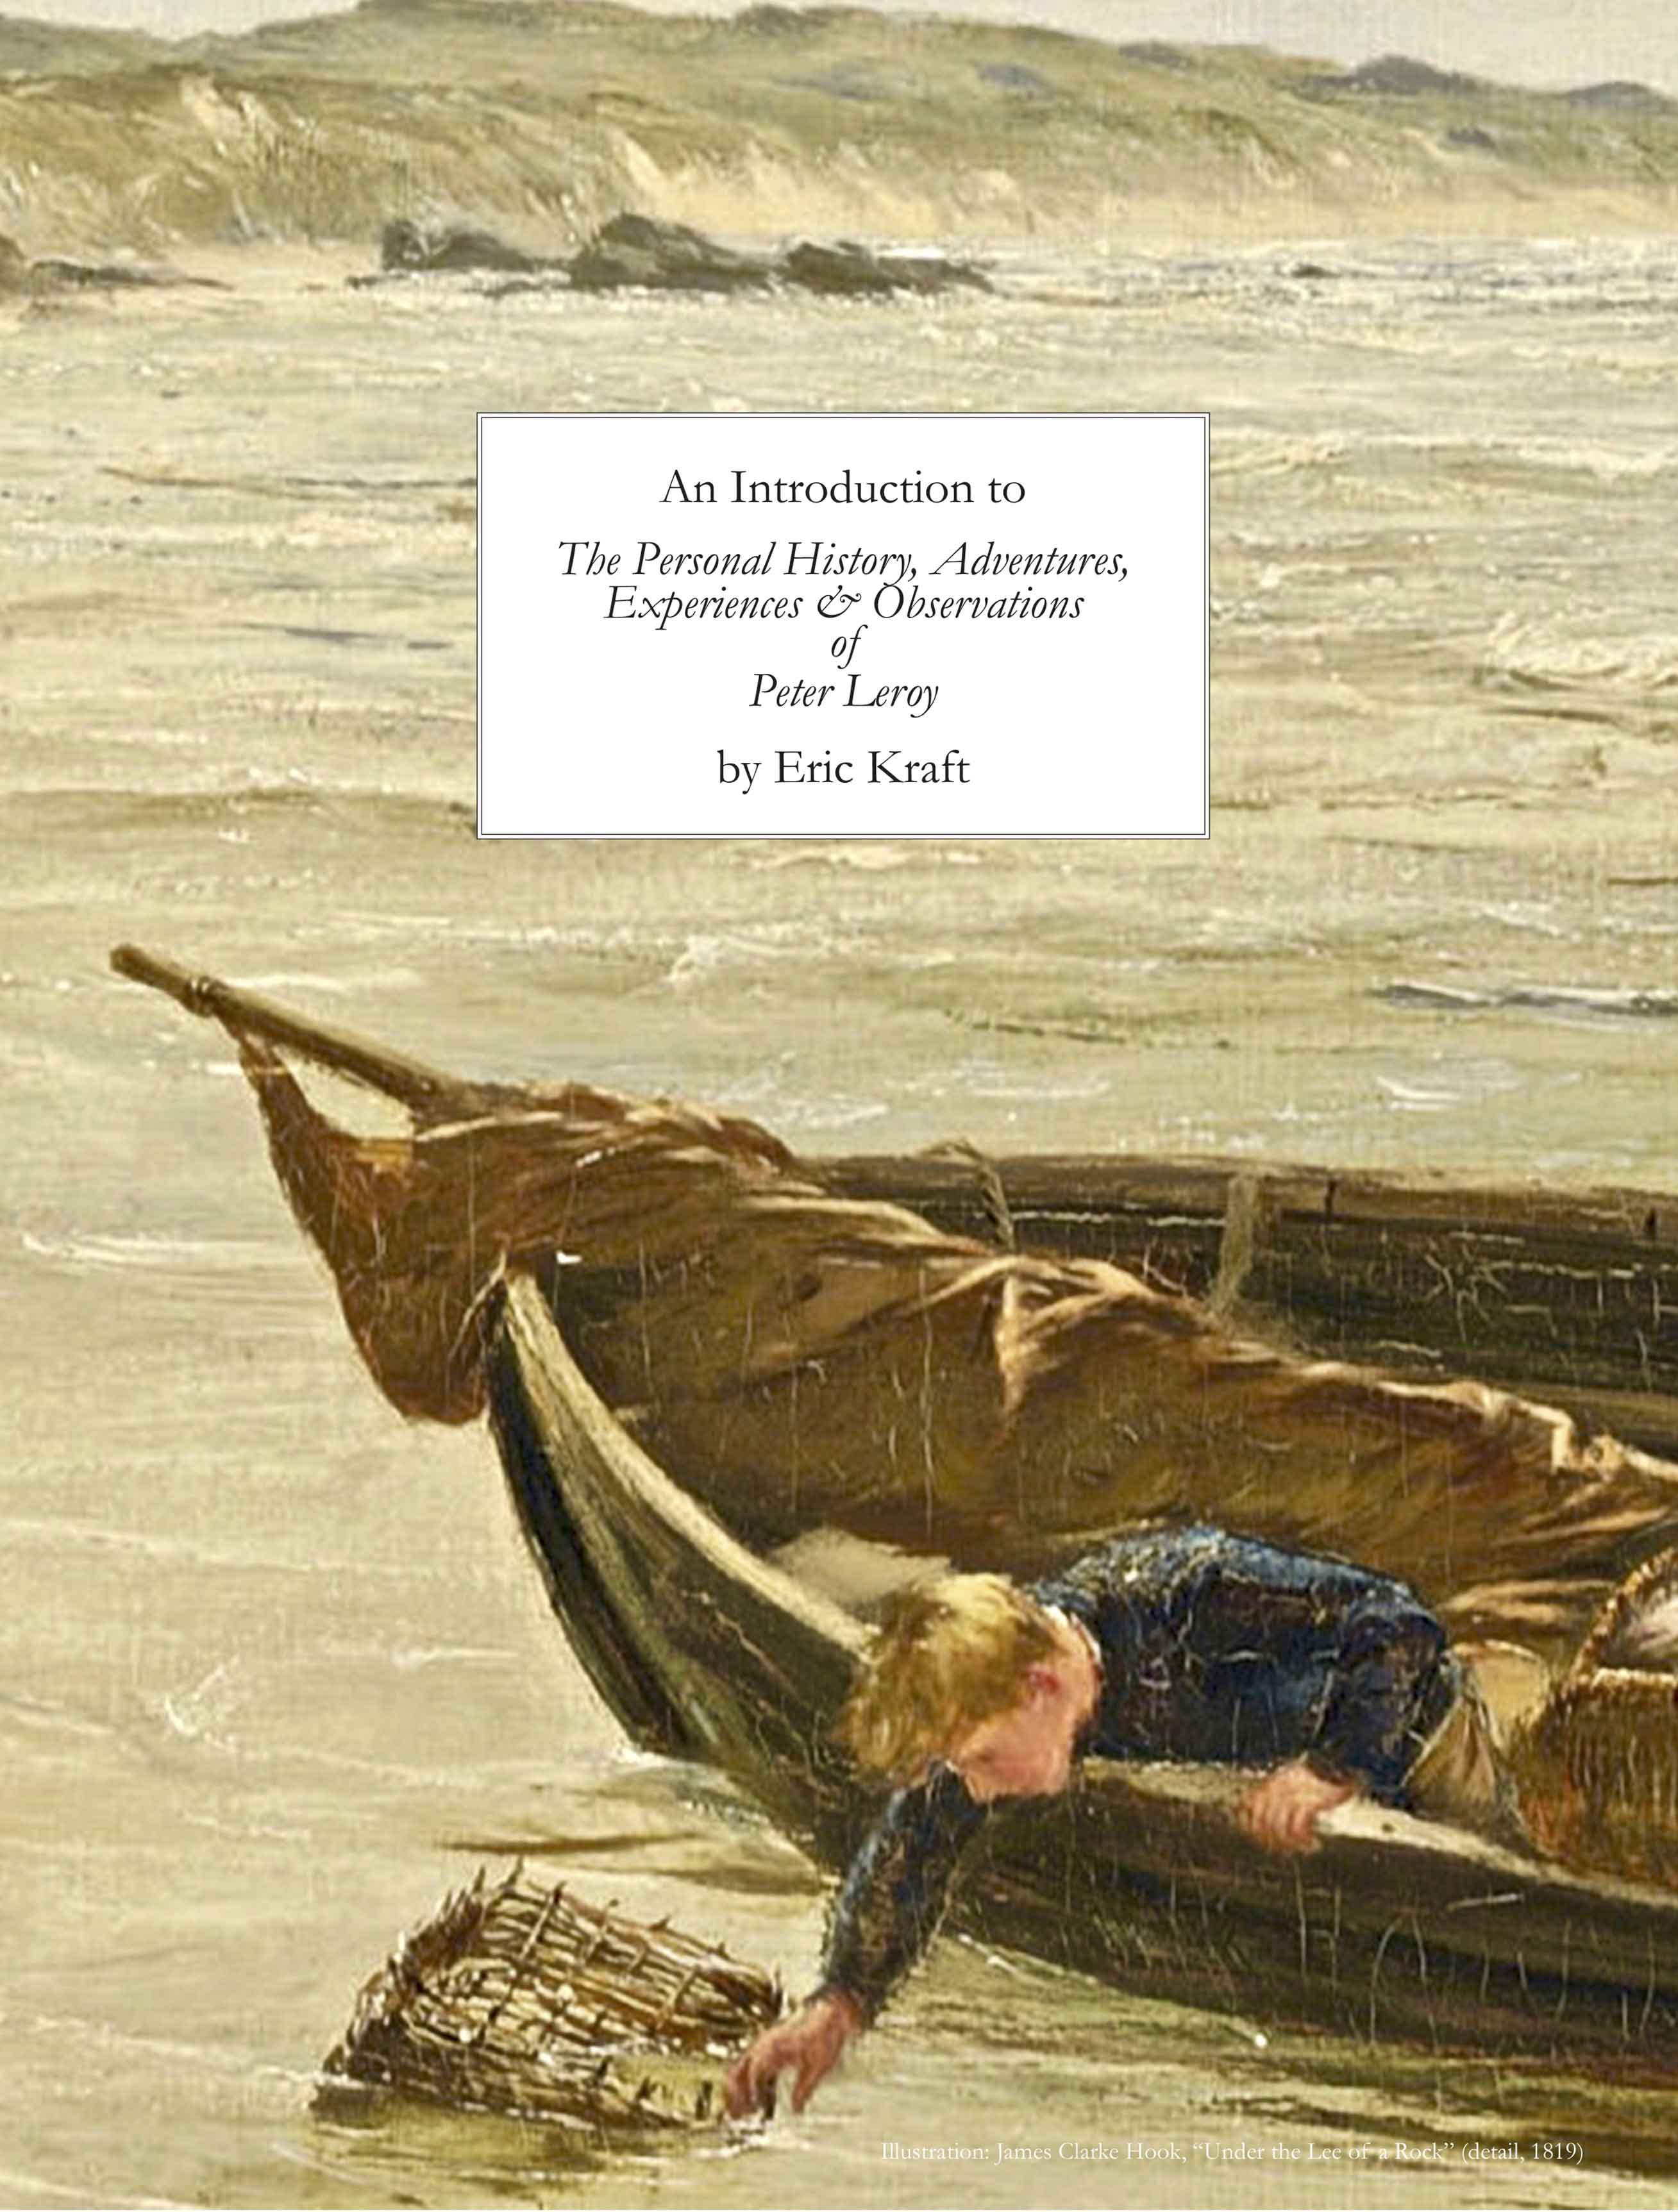 Cover of the Introduction